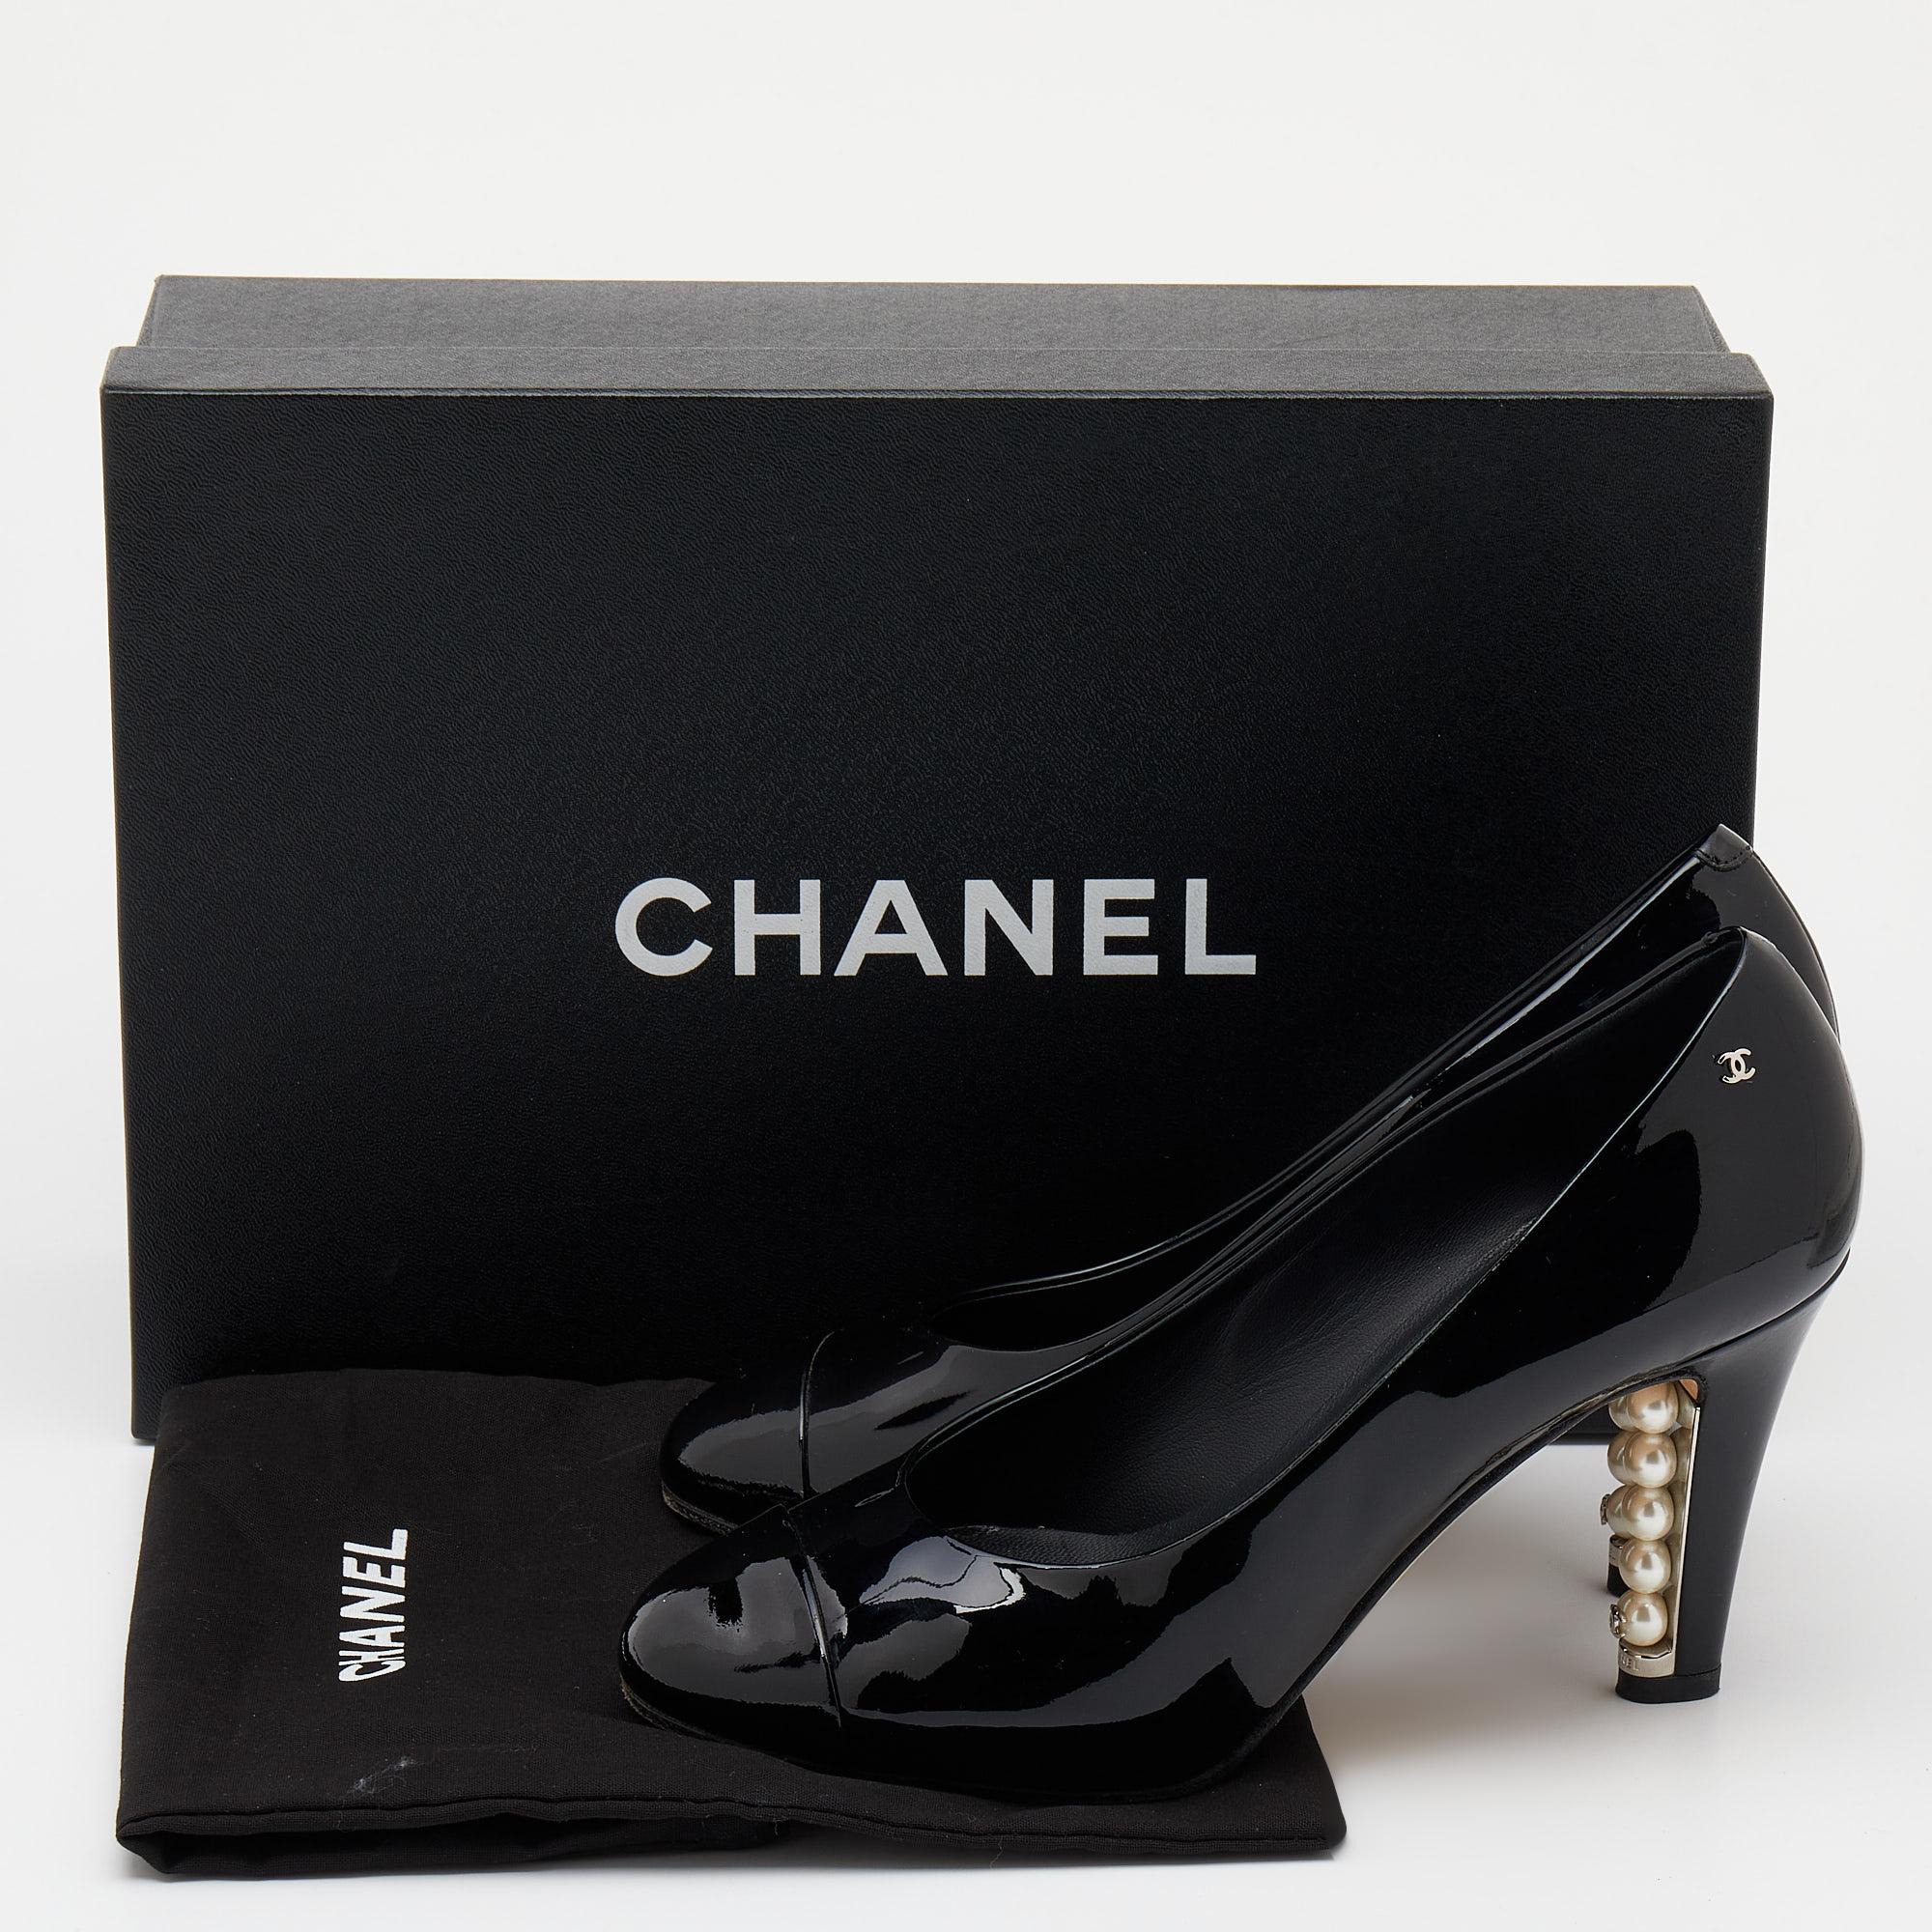 These pre-owned Chanel pumps come crafted from black patent leather in a round-toe silhouette. The faux pearls on the heels add the perfect finishing touch to the pair.

Includes: Original Dustbag, Original Box, Info Booklet, Extra Heel Tips